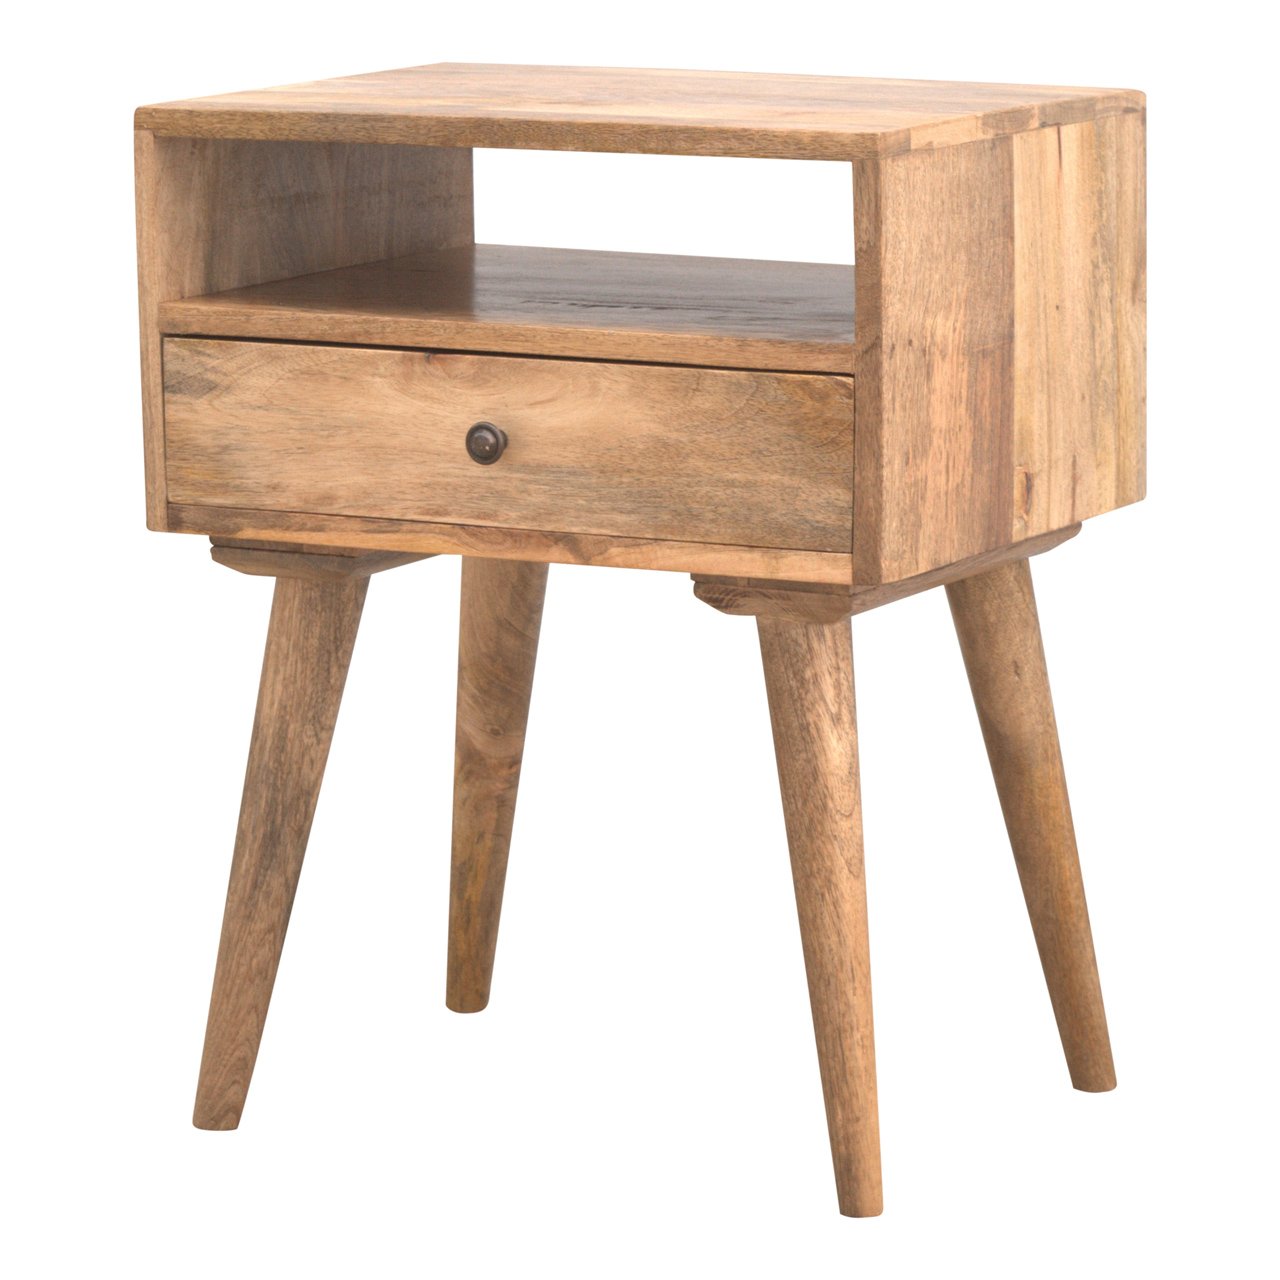 Modern Solid Wood Bedside with Open Slot